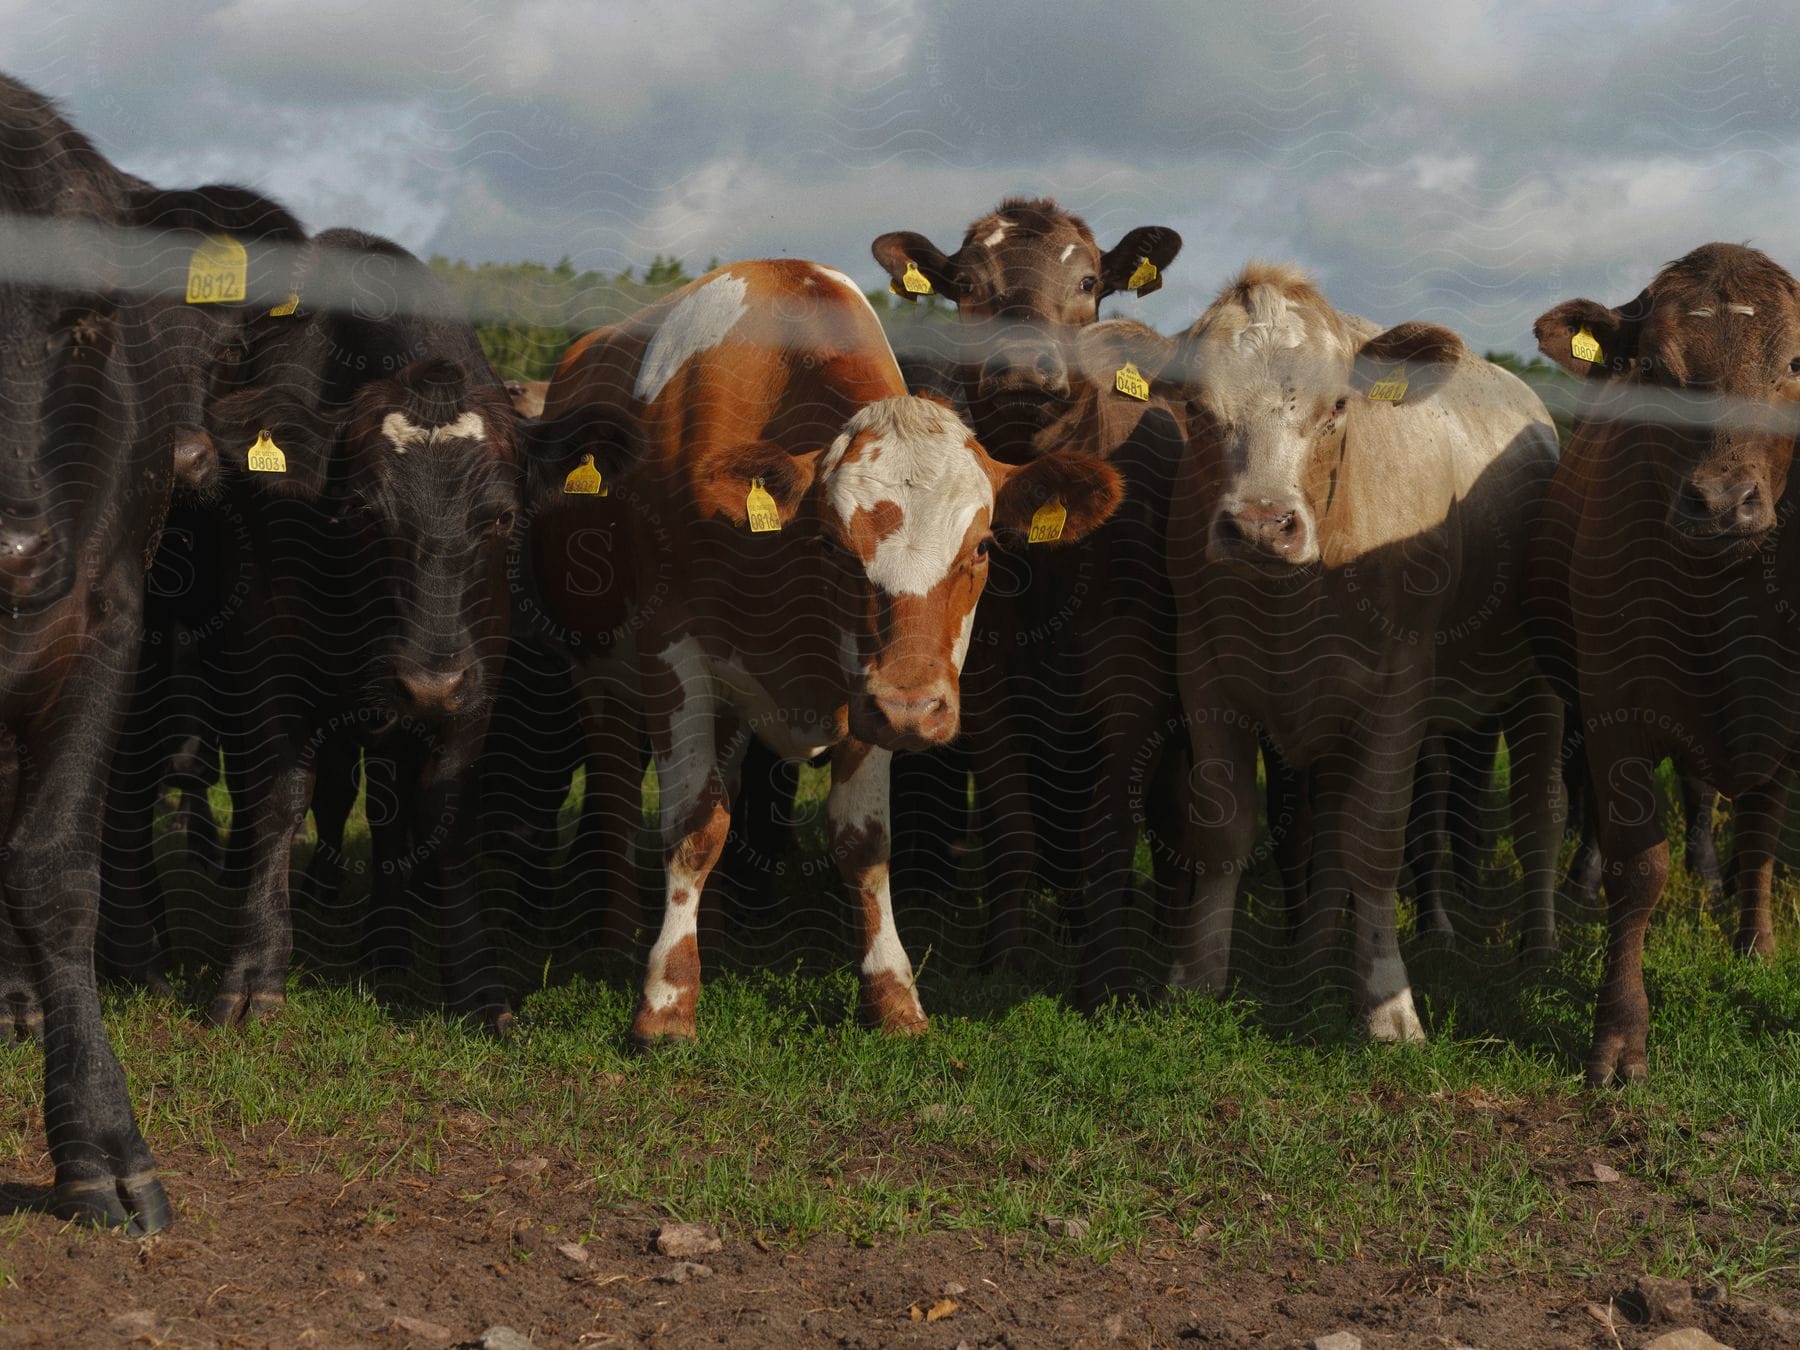 A group of cattle is standing together with yellow tags in their ears.